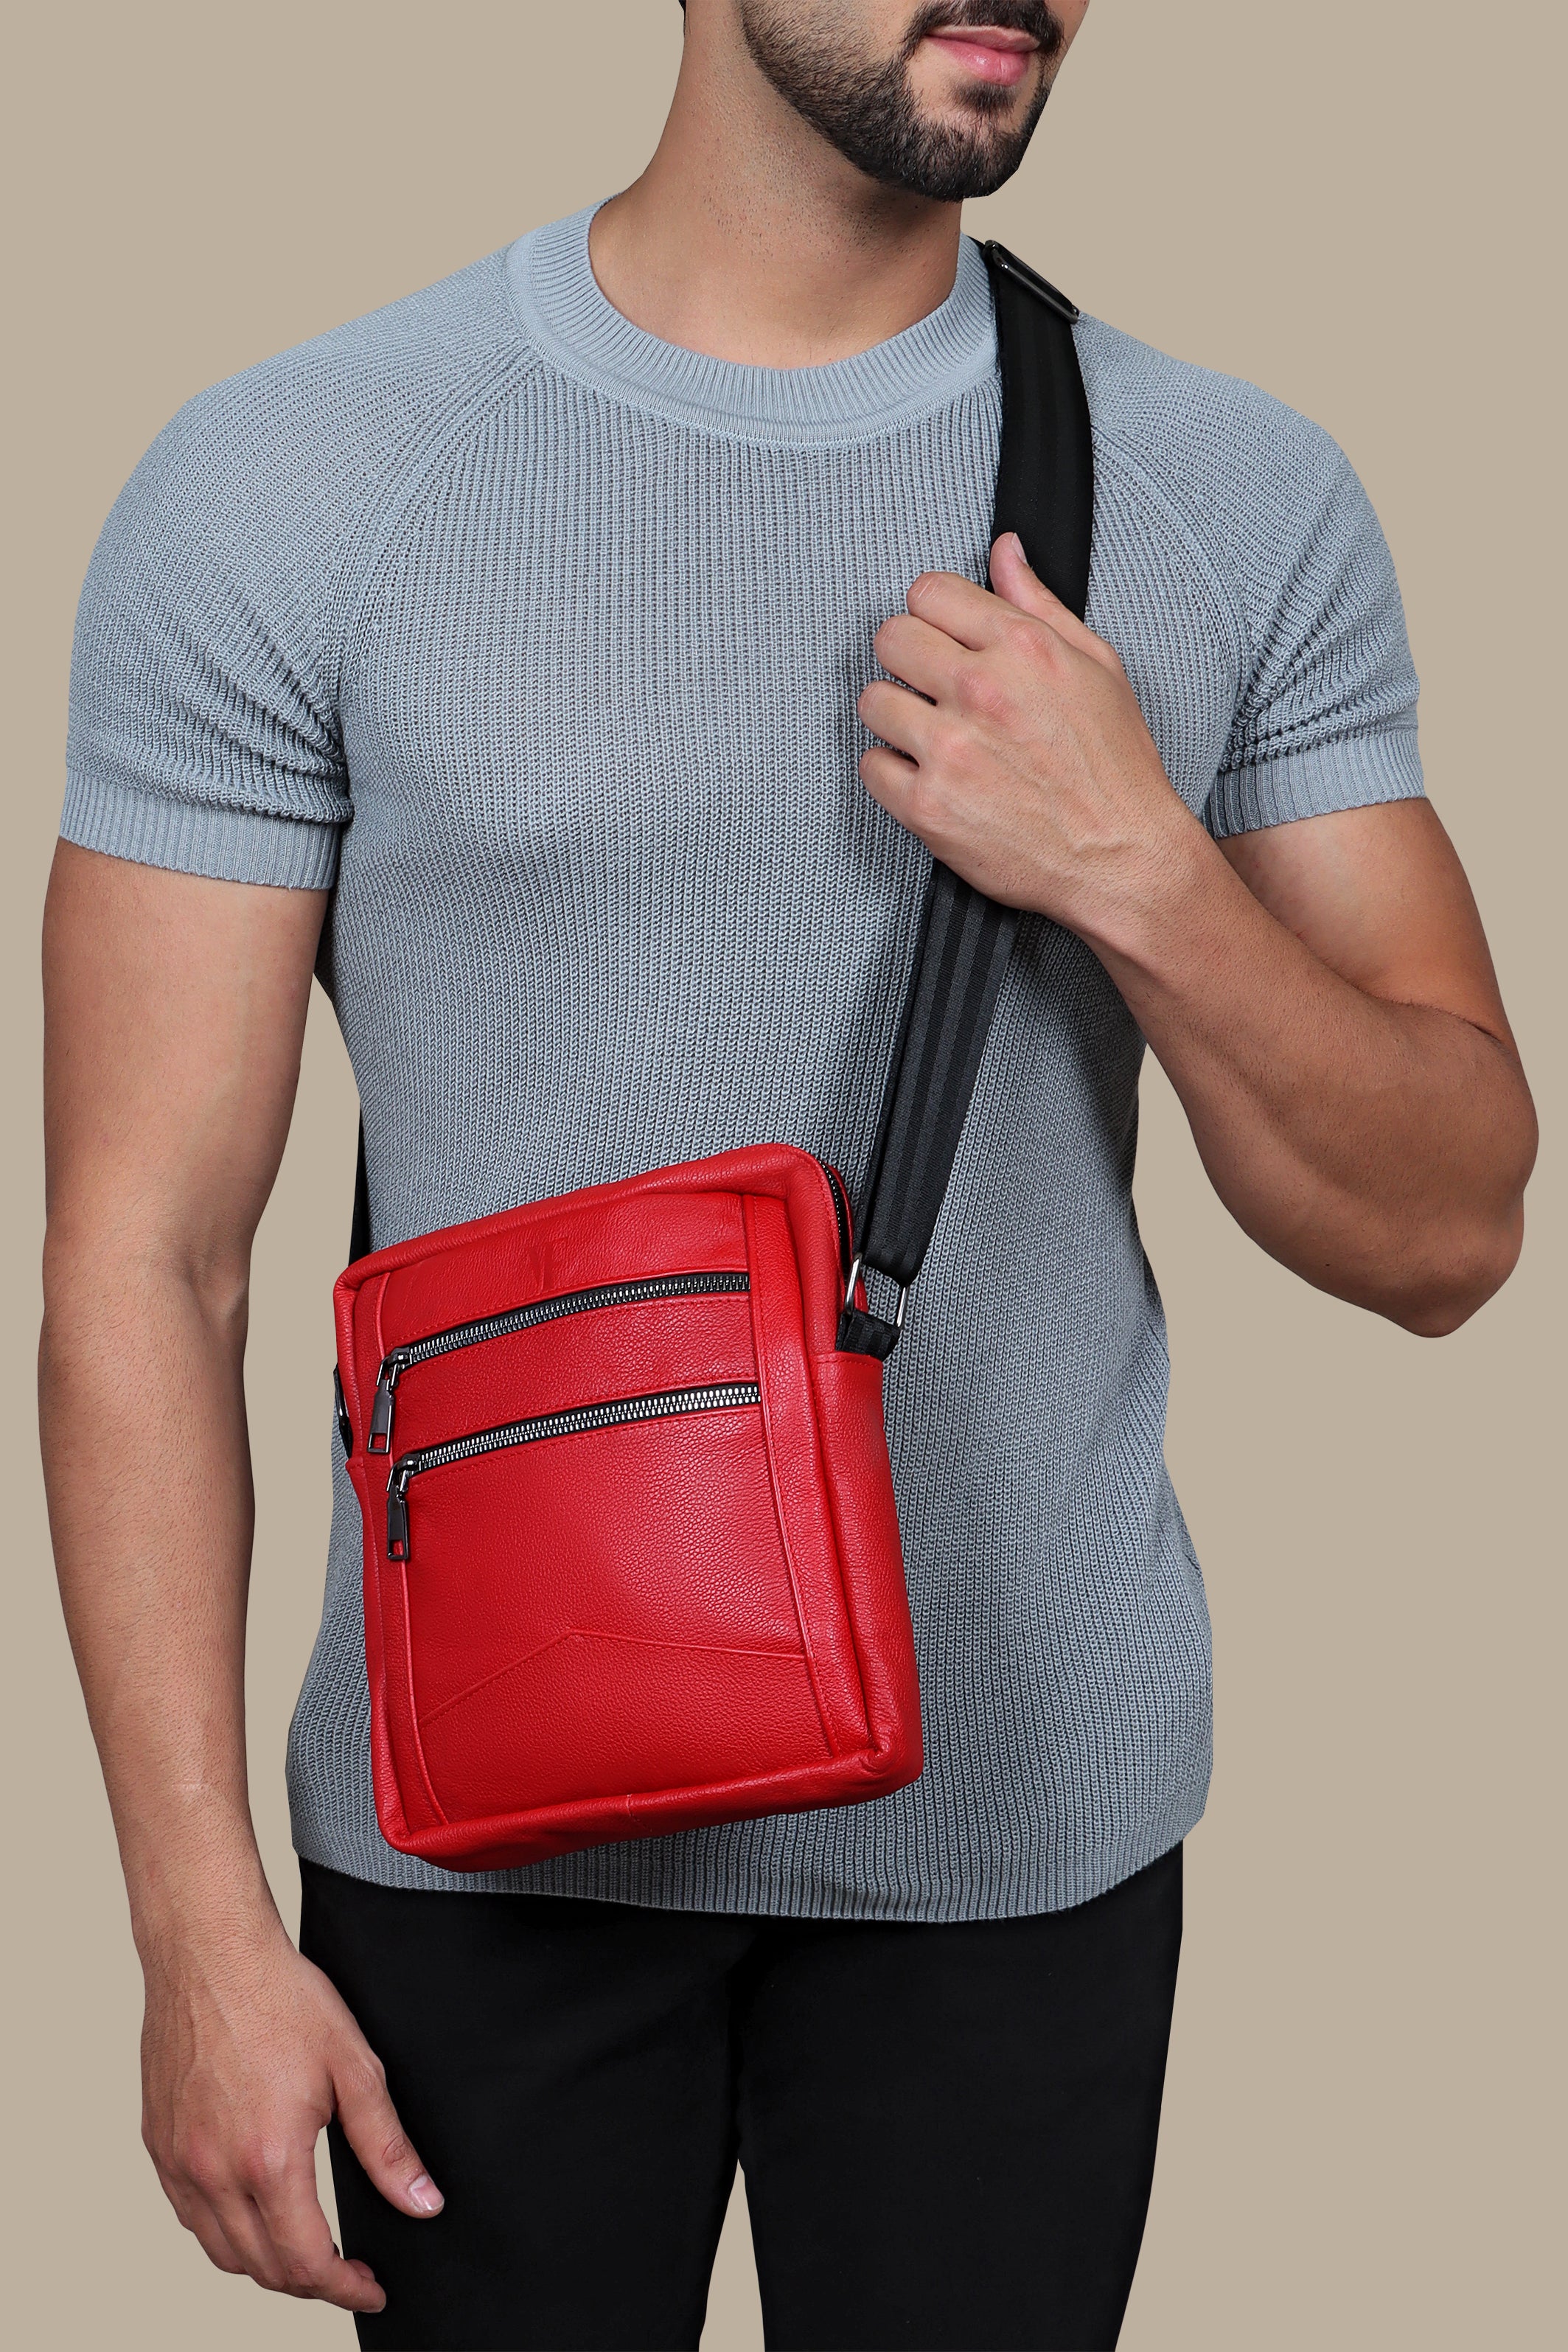 Red Elegance: Stylish Cross Bag with Back Zippers and Belt Accent